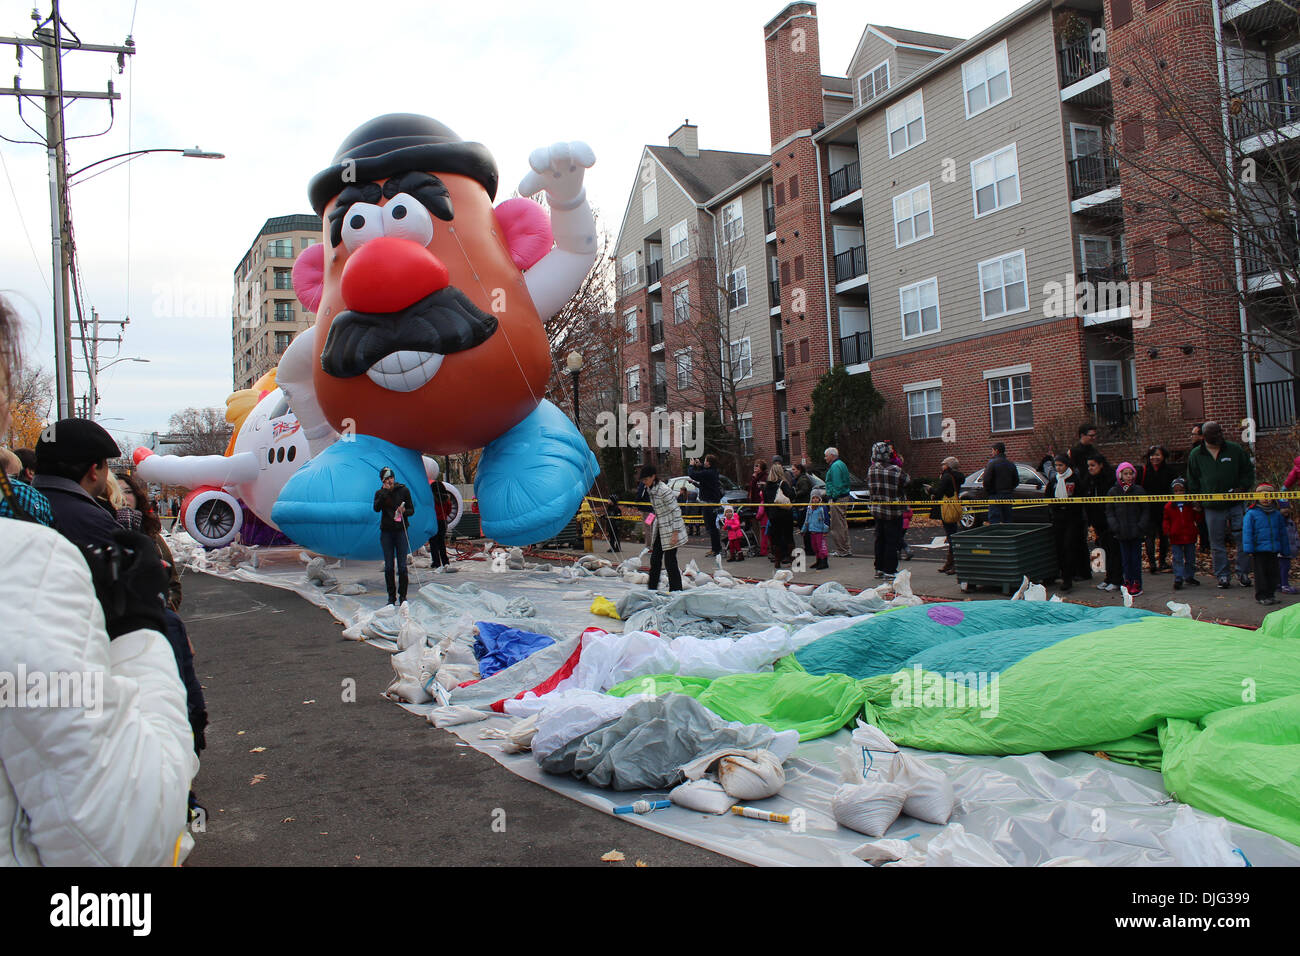 STAMFORD, CT - NOVEMBER 23, 2013: Mr.Potato Head is being inflated in the preparation for the yearly UBS Parade Spectacular on N Stock Photo